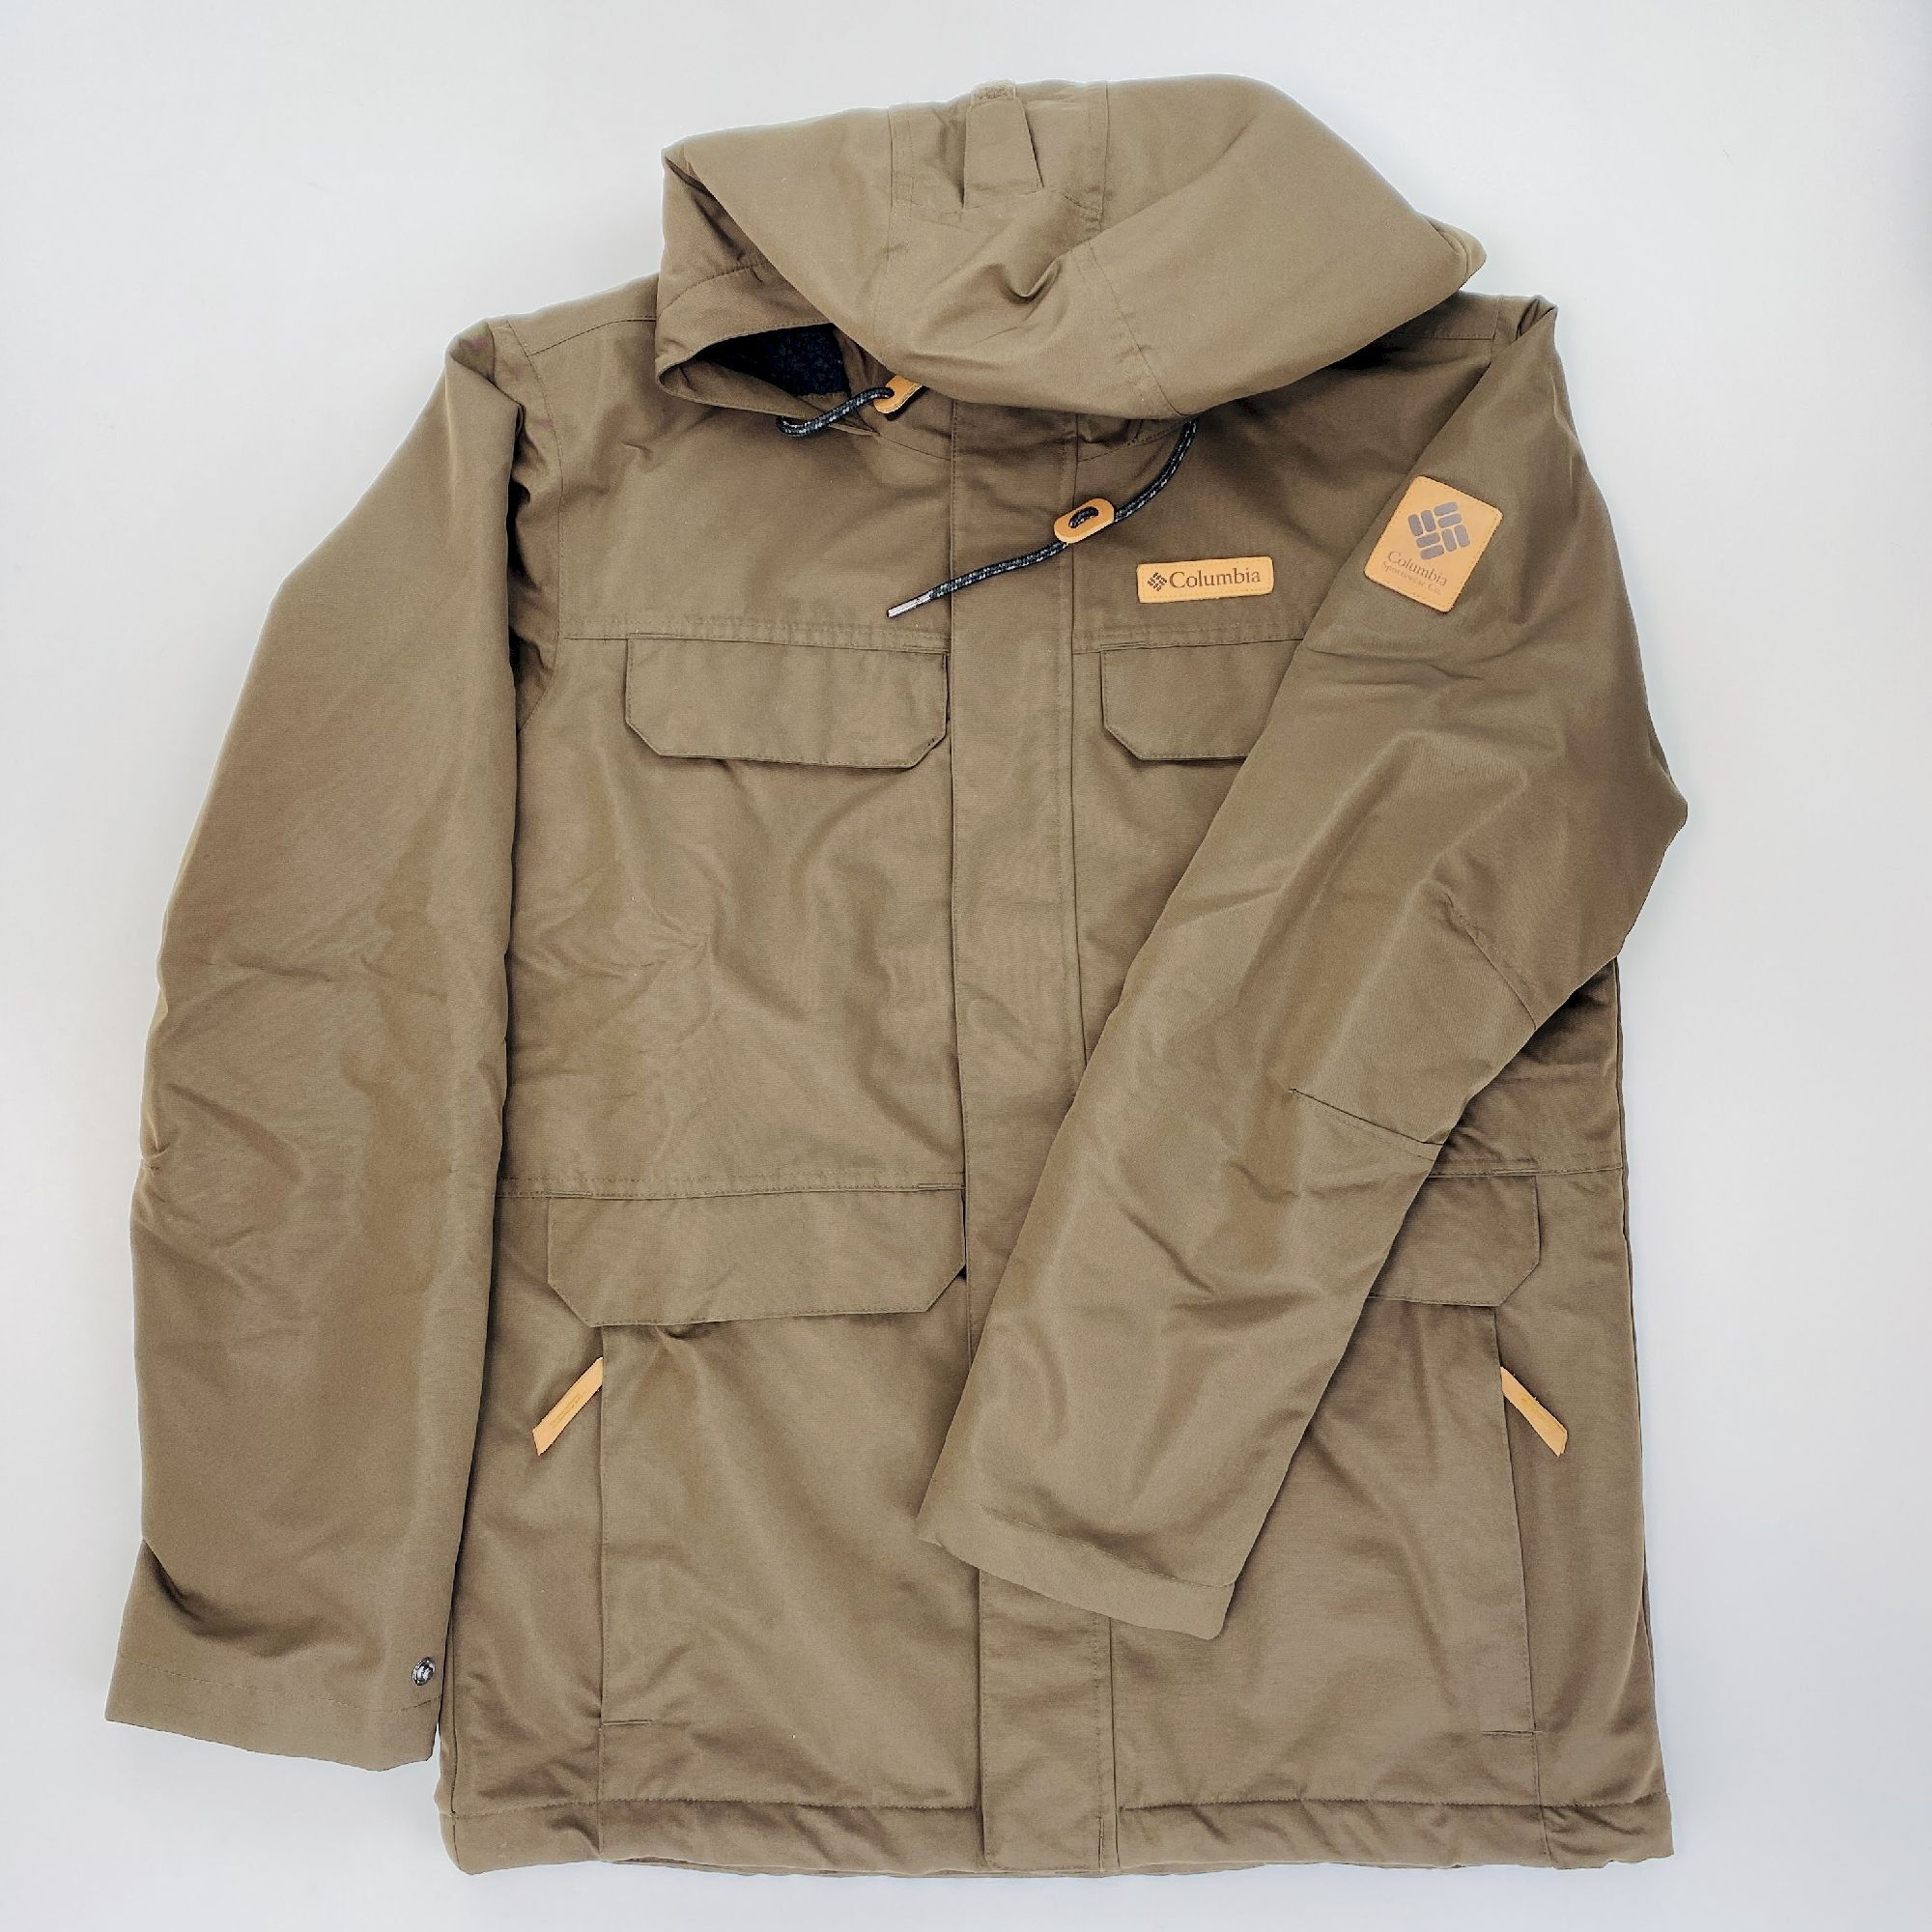 Columbia South Canyon™ Lined Jacket - Seconde main Veste homme - Vert olive - M | Hardloop